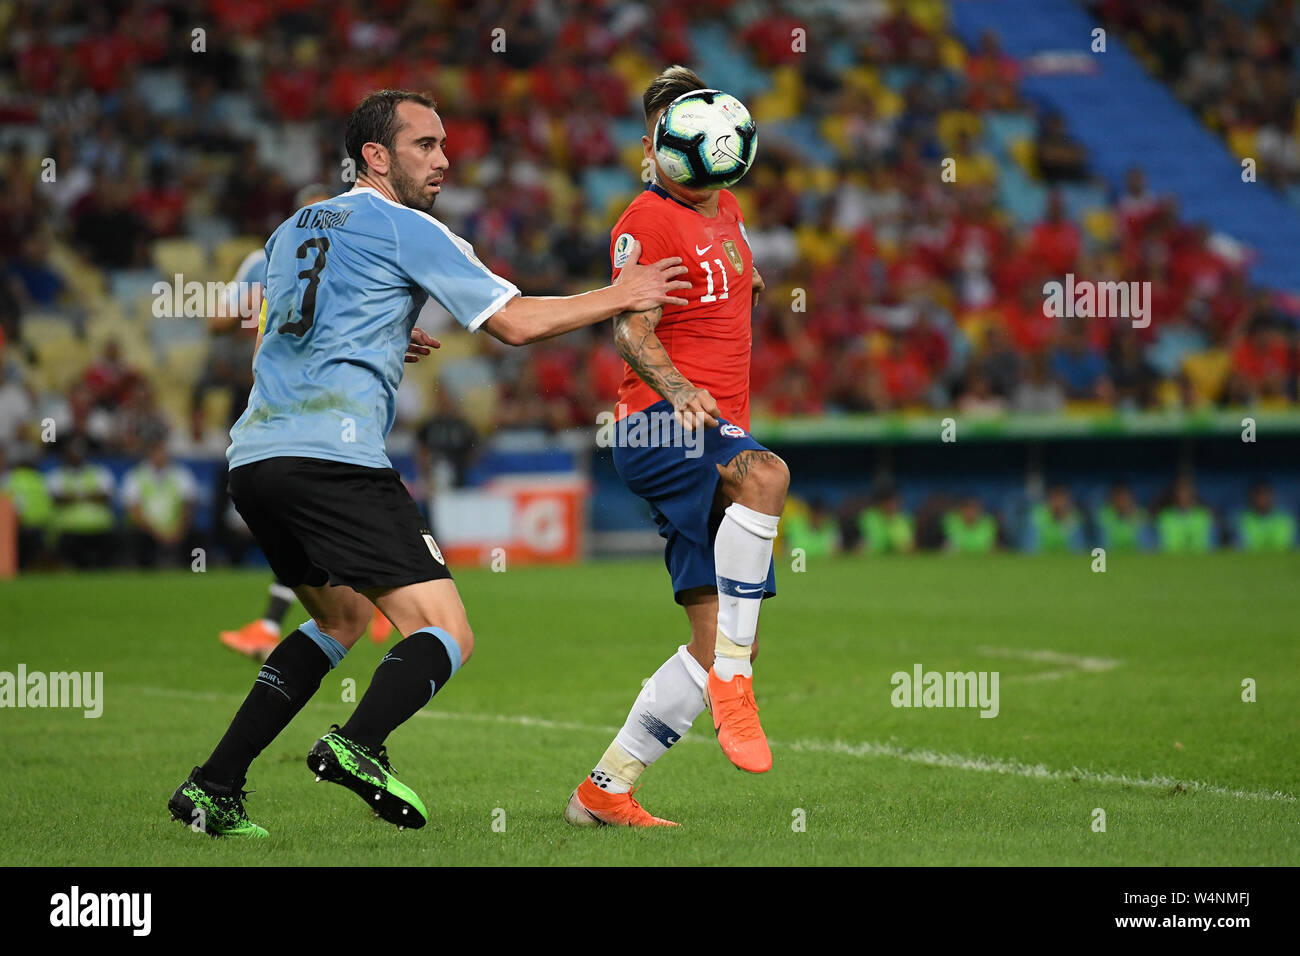 Rio de Janeiro, Brazil, JUNE 24, 2019. Soccer player Vargas of Chile, during the match Chile x Uruguay for Copa America 2019 in the stadium of Maracan Stock Photo